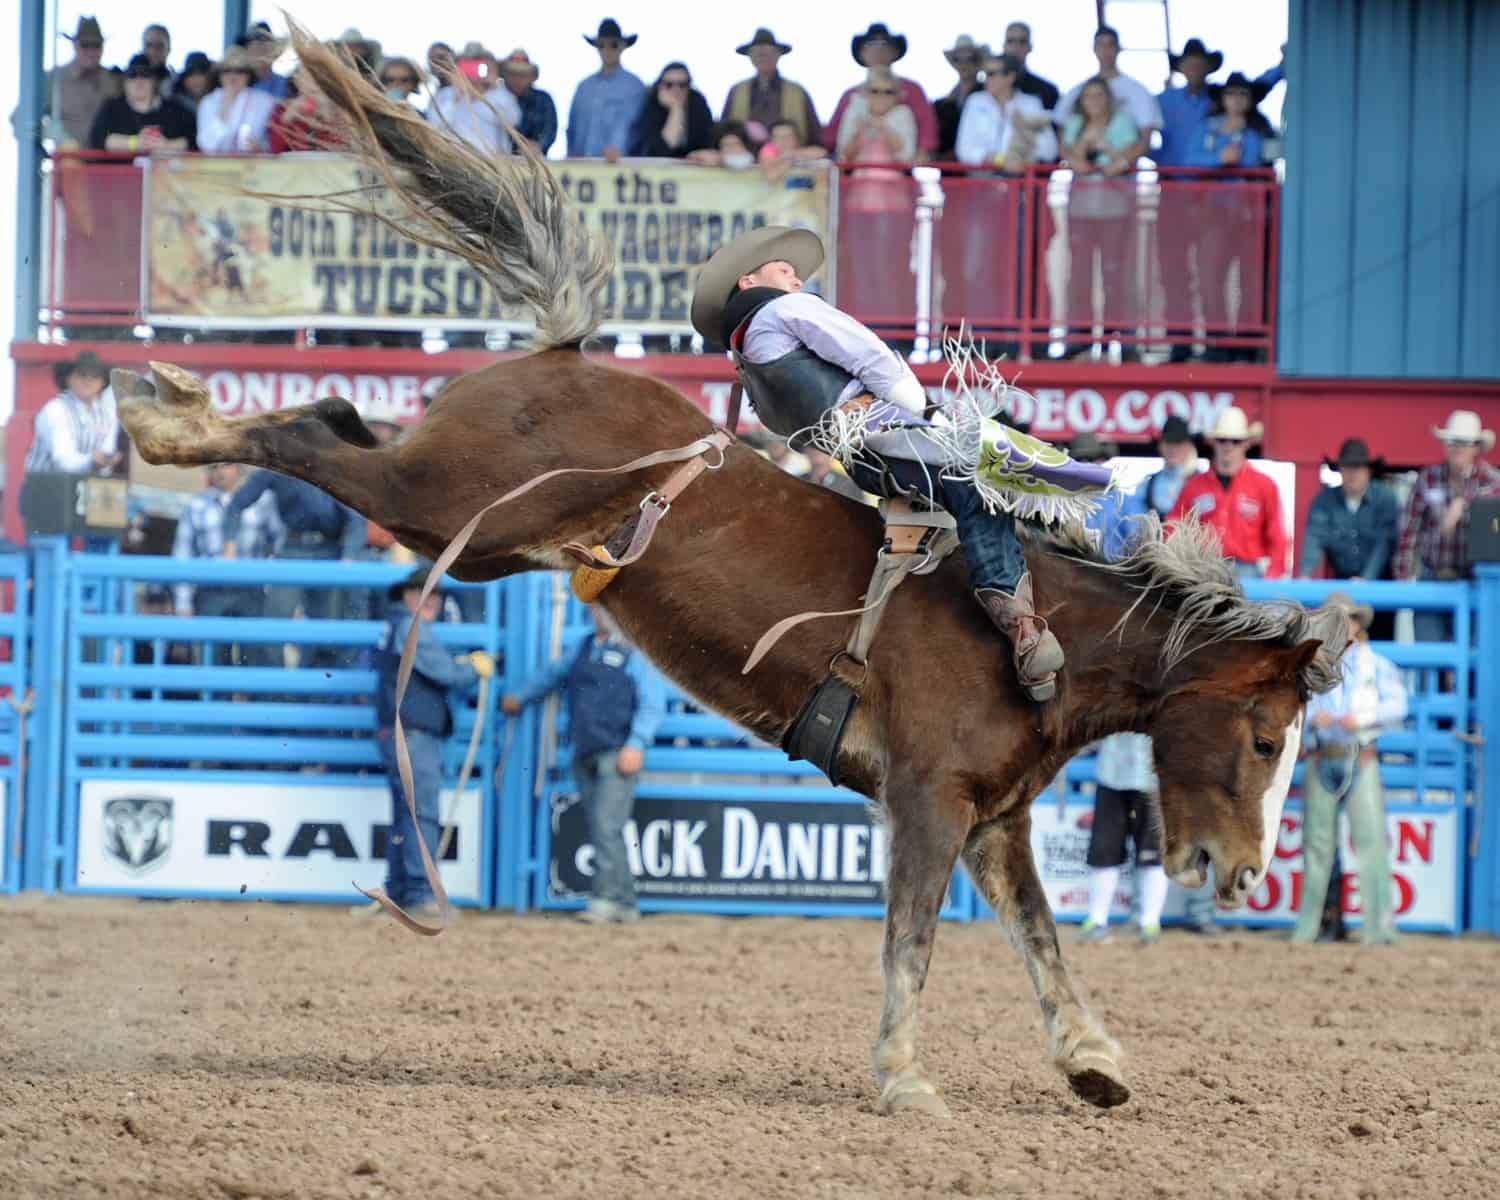 Tucson Rodeo Guide Tickets, Parking, Barn Dances, Parade TucsonTopia